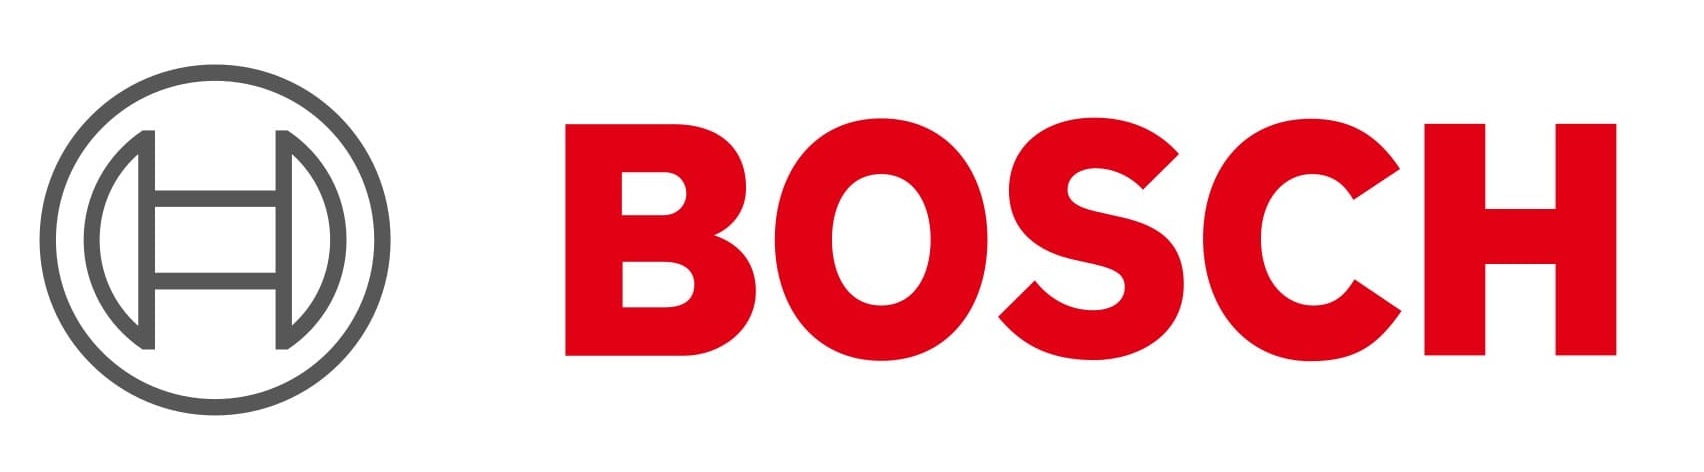 BOSCH Stoves Oven Service, Kenmore Stoves Oven Service